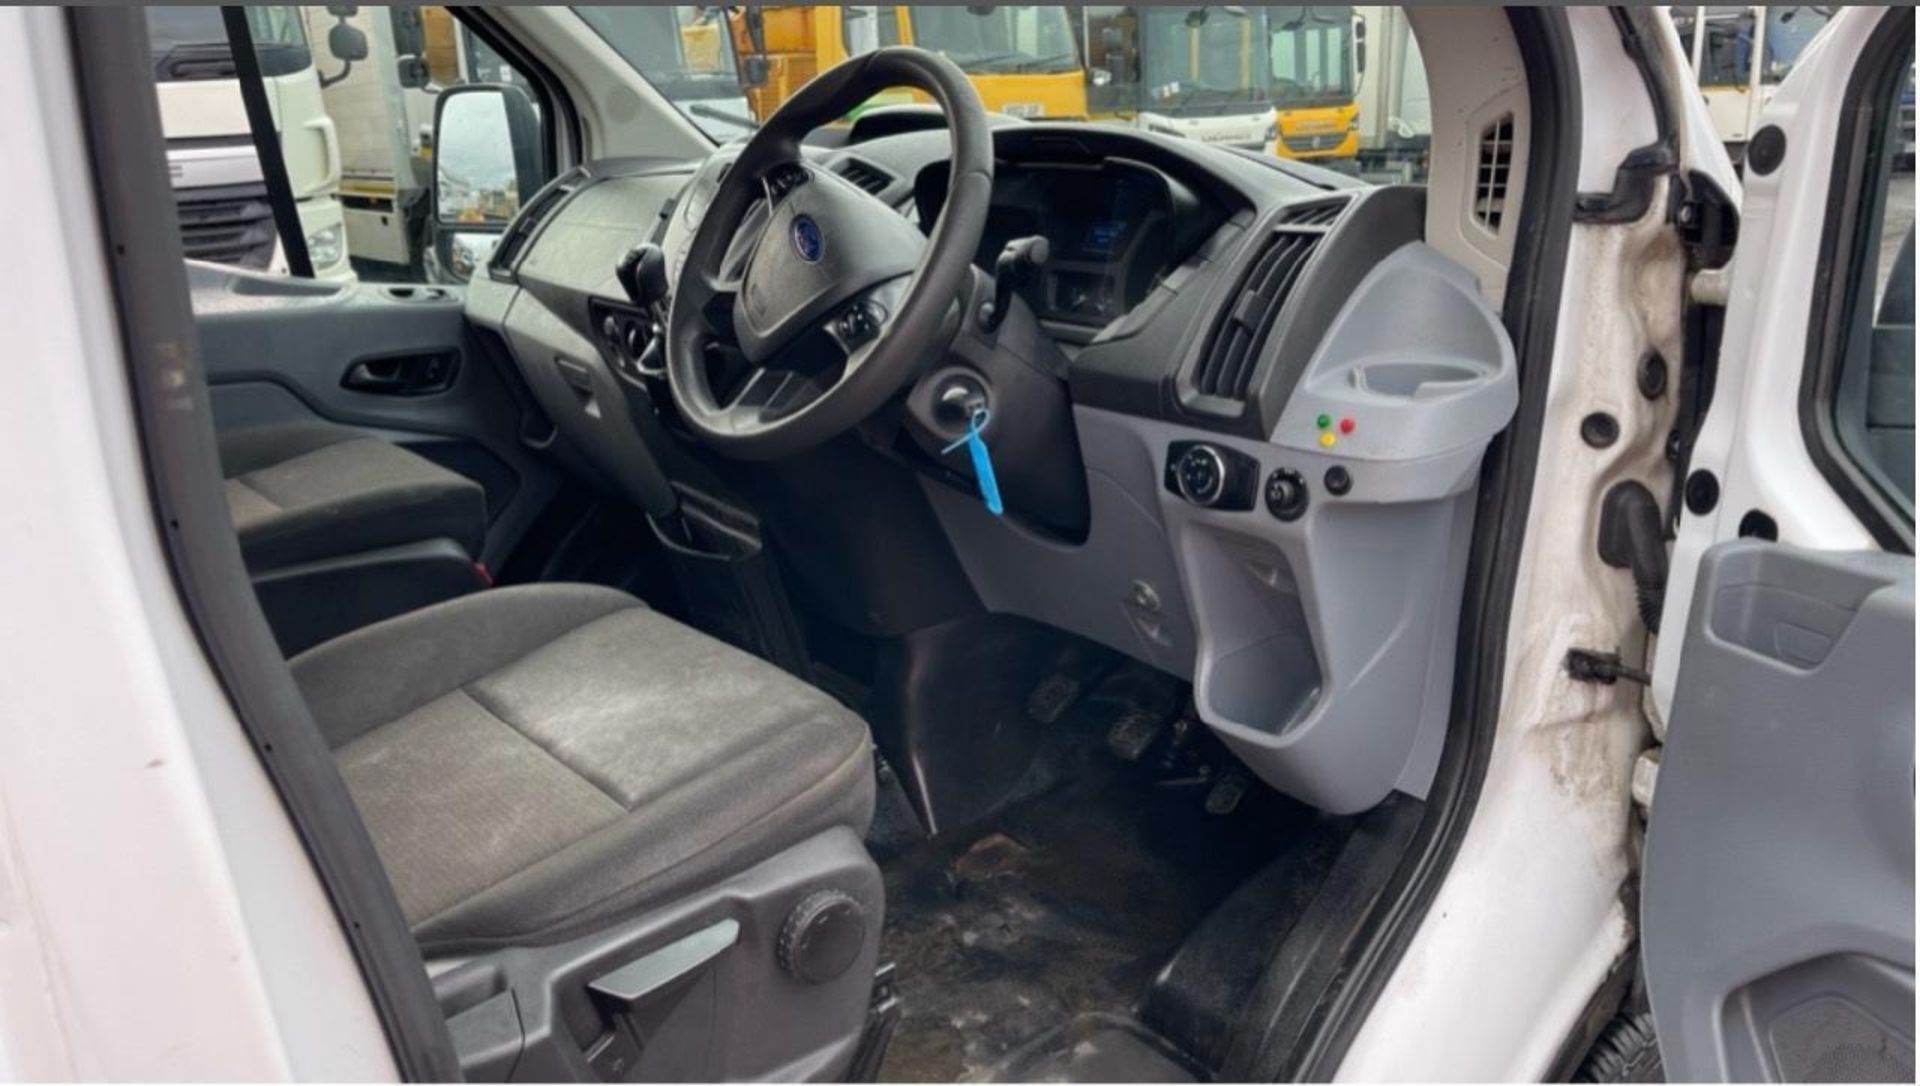 2015 FORD TRANSIT T350 MEDIUM WHEEL BASE - YOUR RELIABLE WORKHORSE - Image 7 of 14